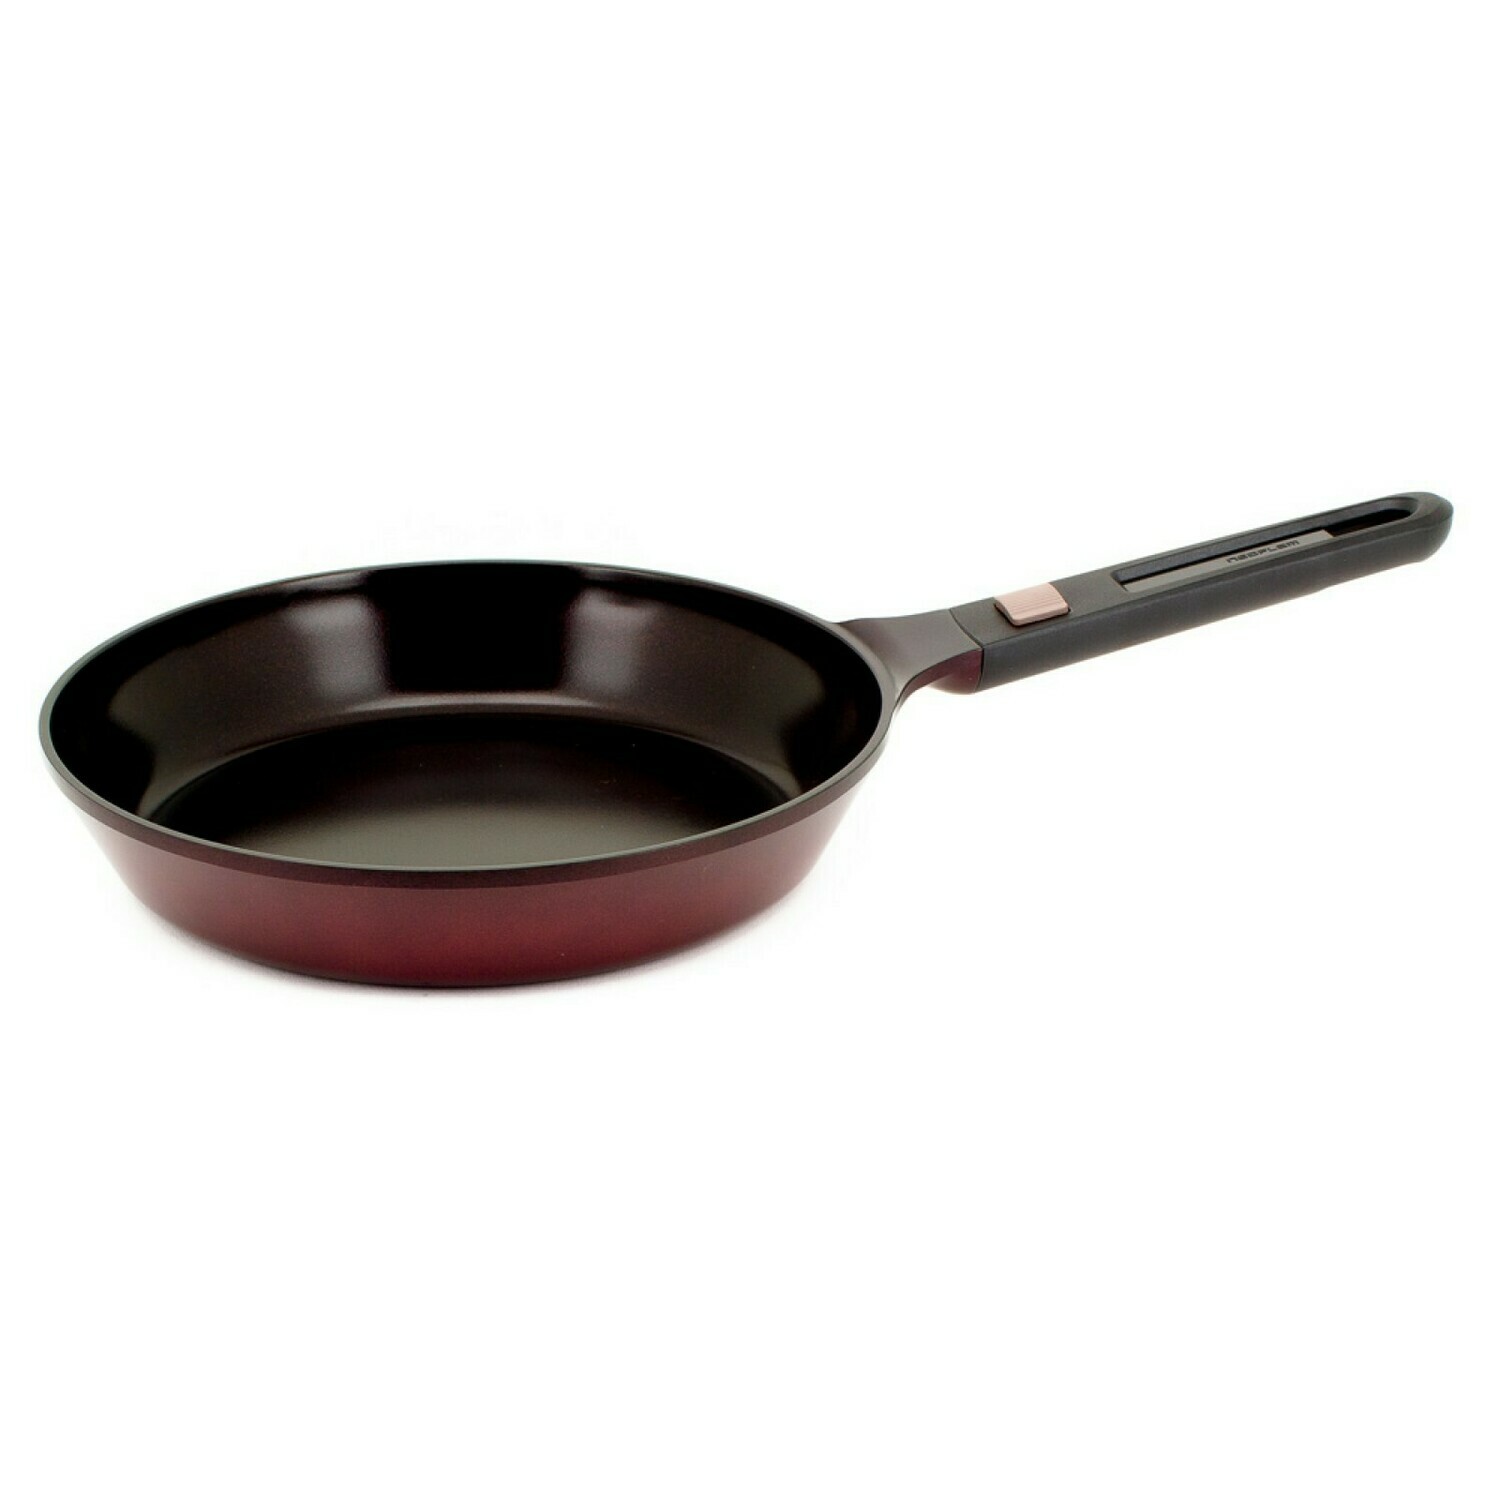 NEOFLAM- MyPan 24cm Frypan Induction with Detachable Handle - Red Ruby